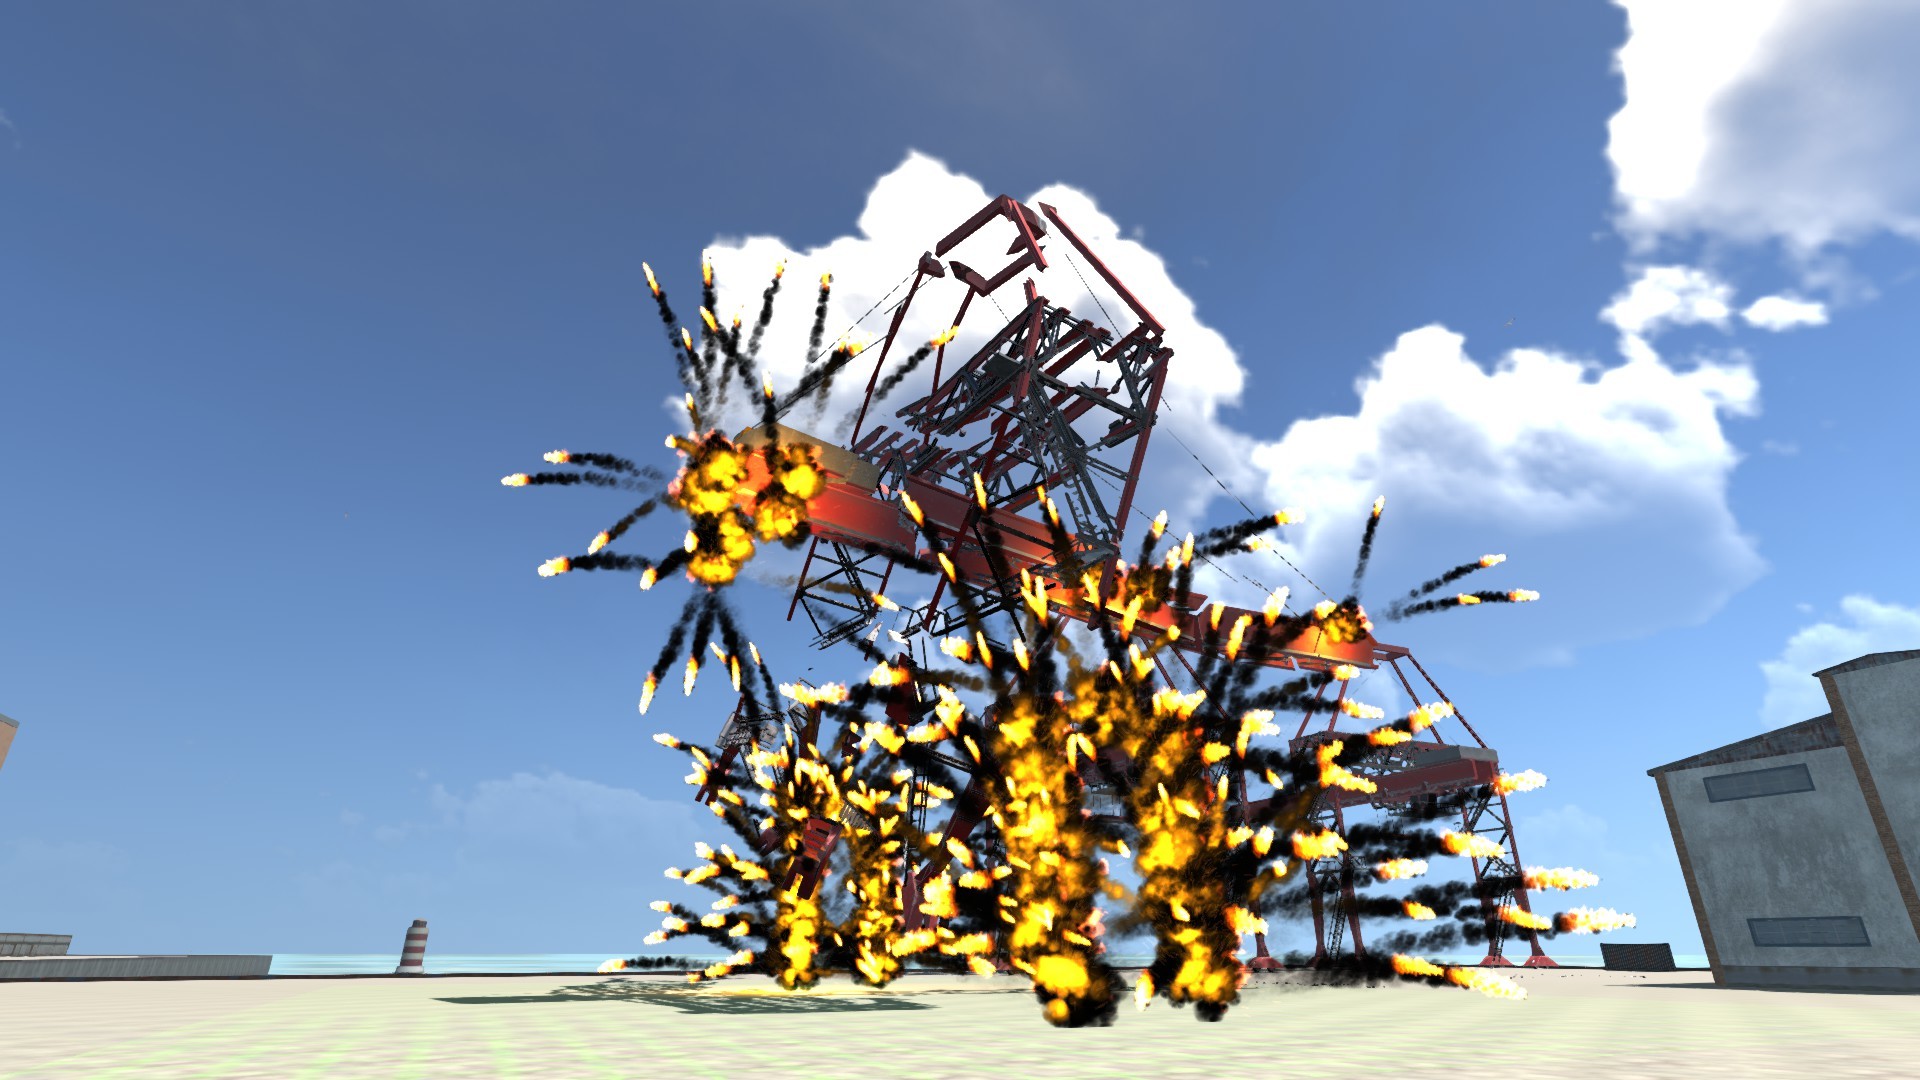 Demolition Expert - The Simulation Free Download